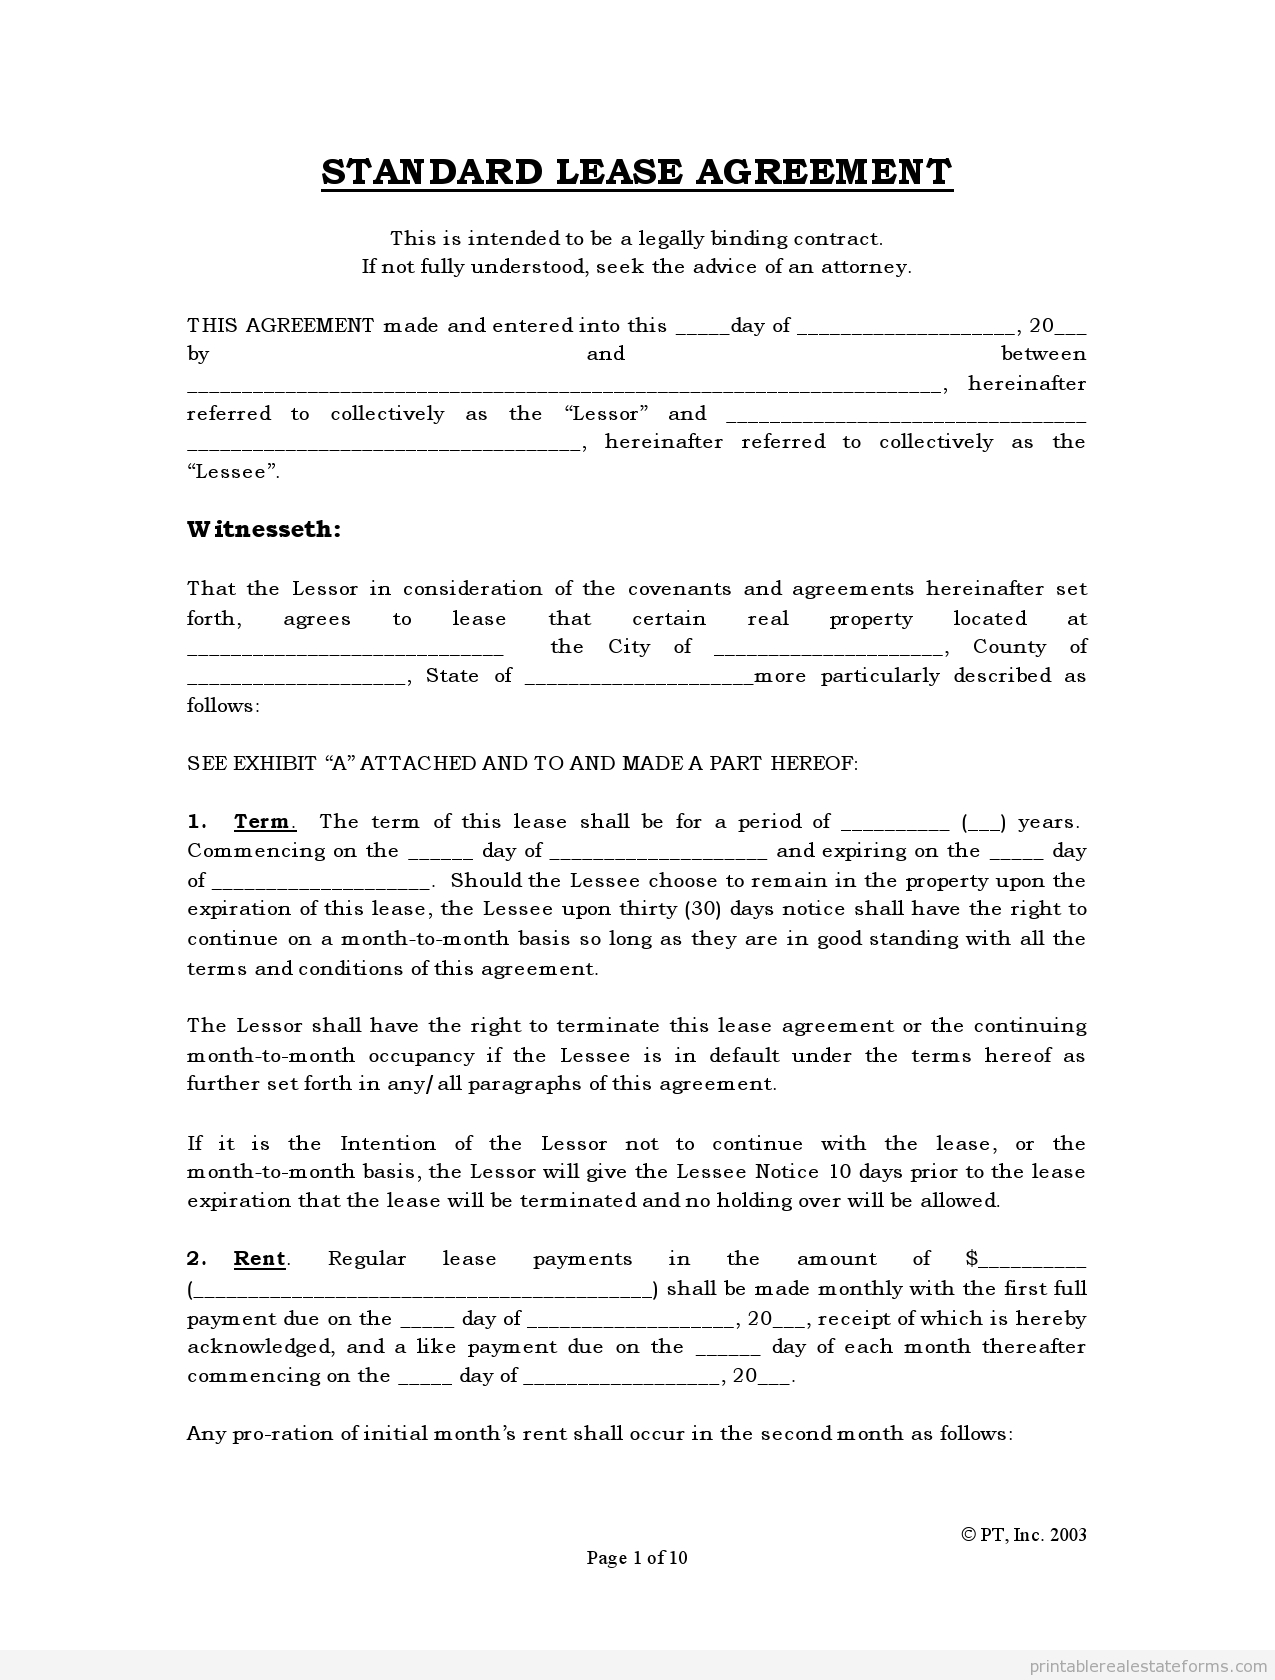 Free Rental Agreements To Print | Free Standard Lease Agreement Form - Free Printable Florida Residential Lease Agreement